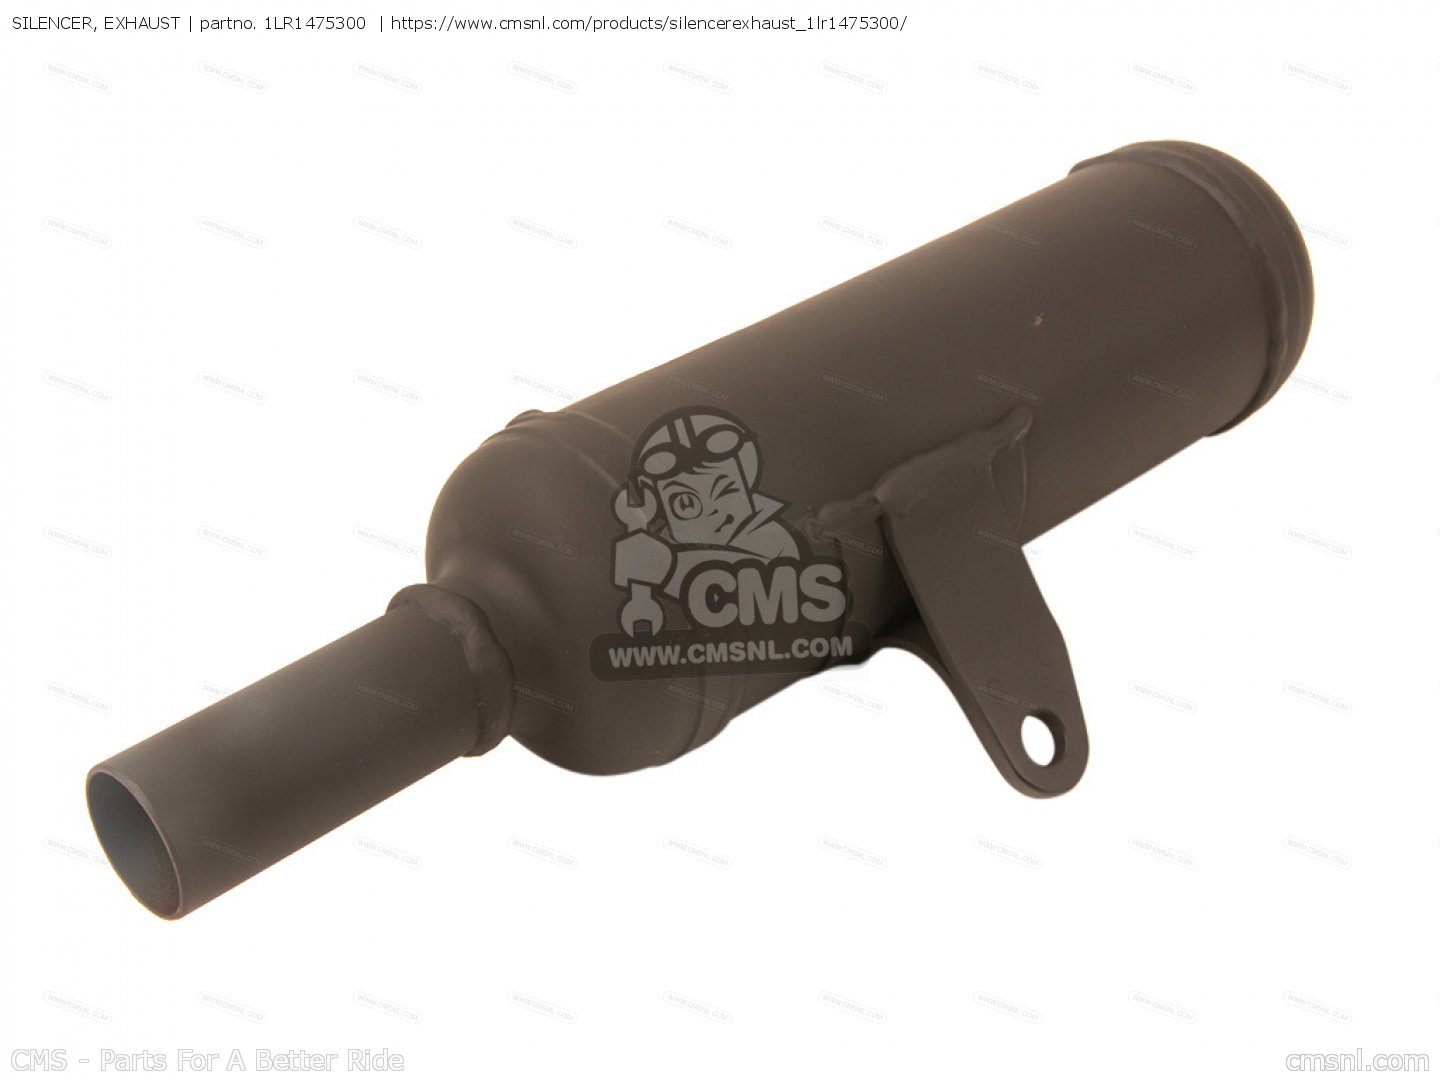 SILENCER, EXHAUST for YZ80 1987 (H) USA - order at CMSNL